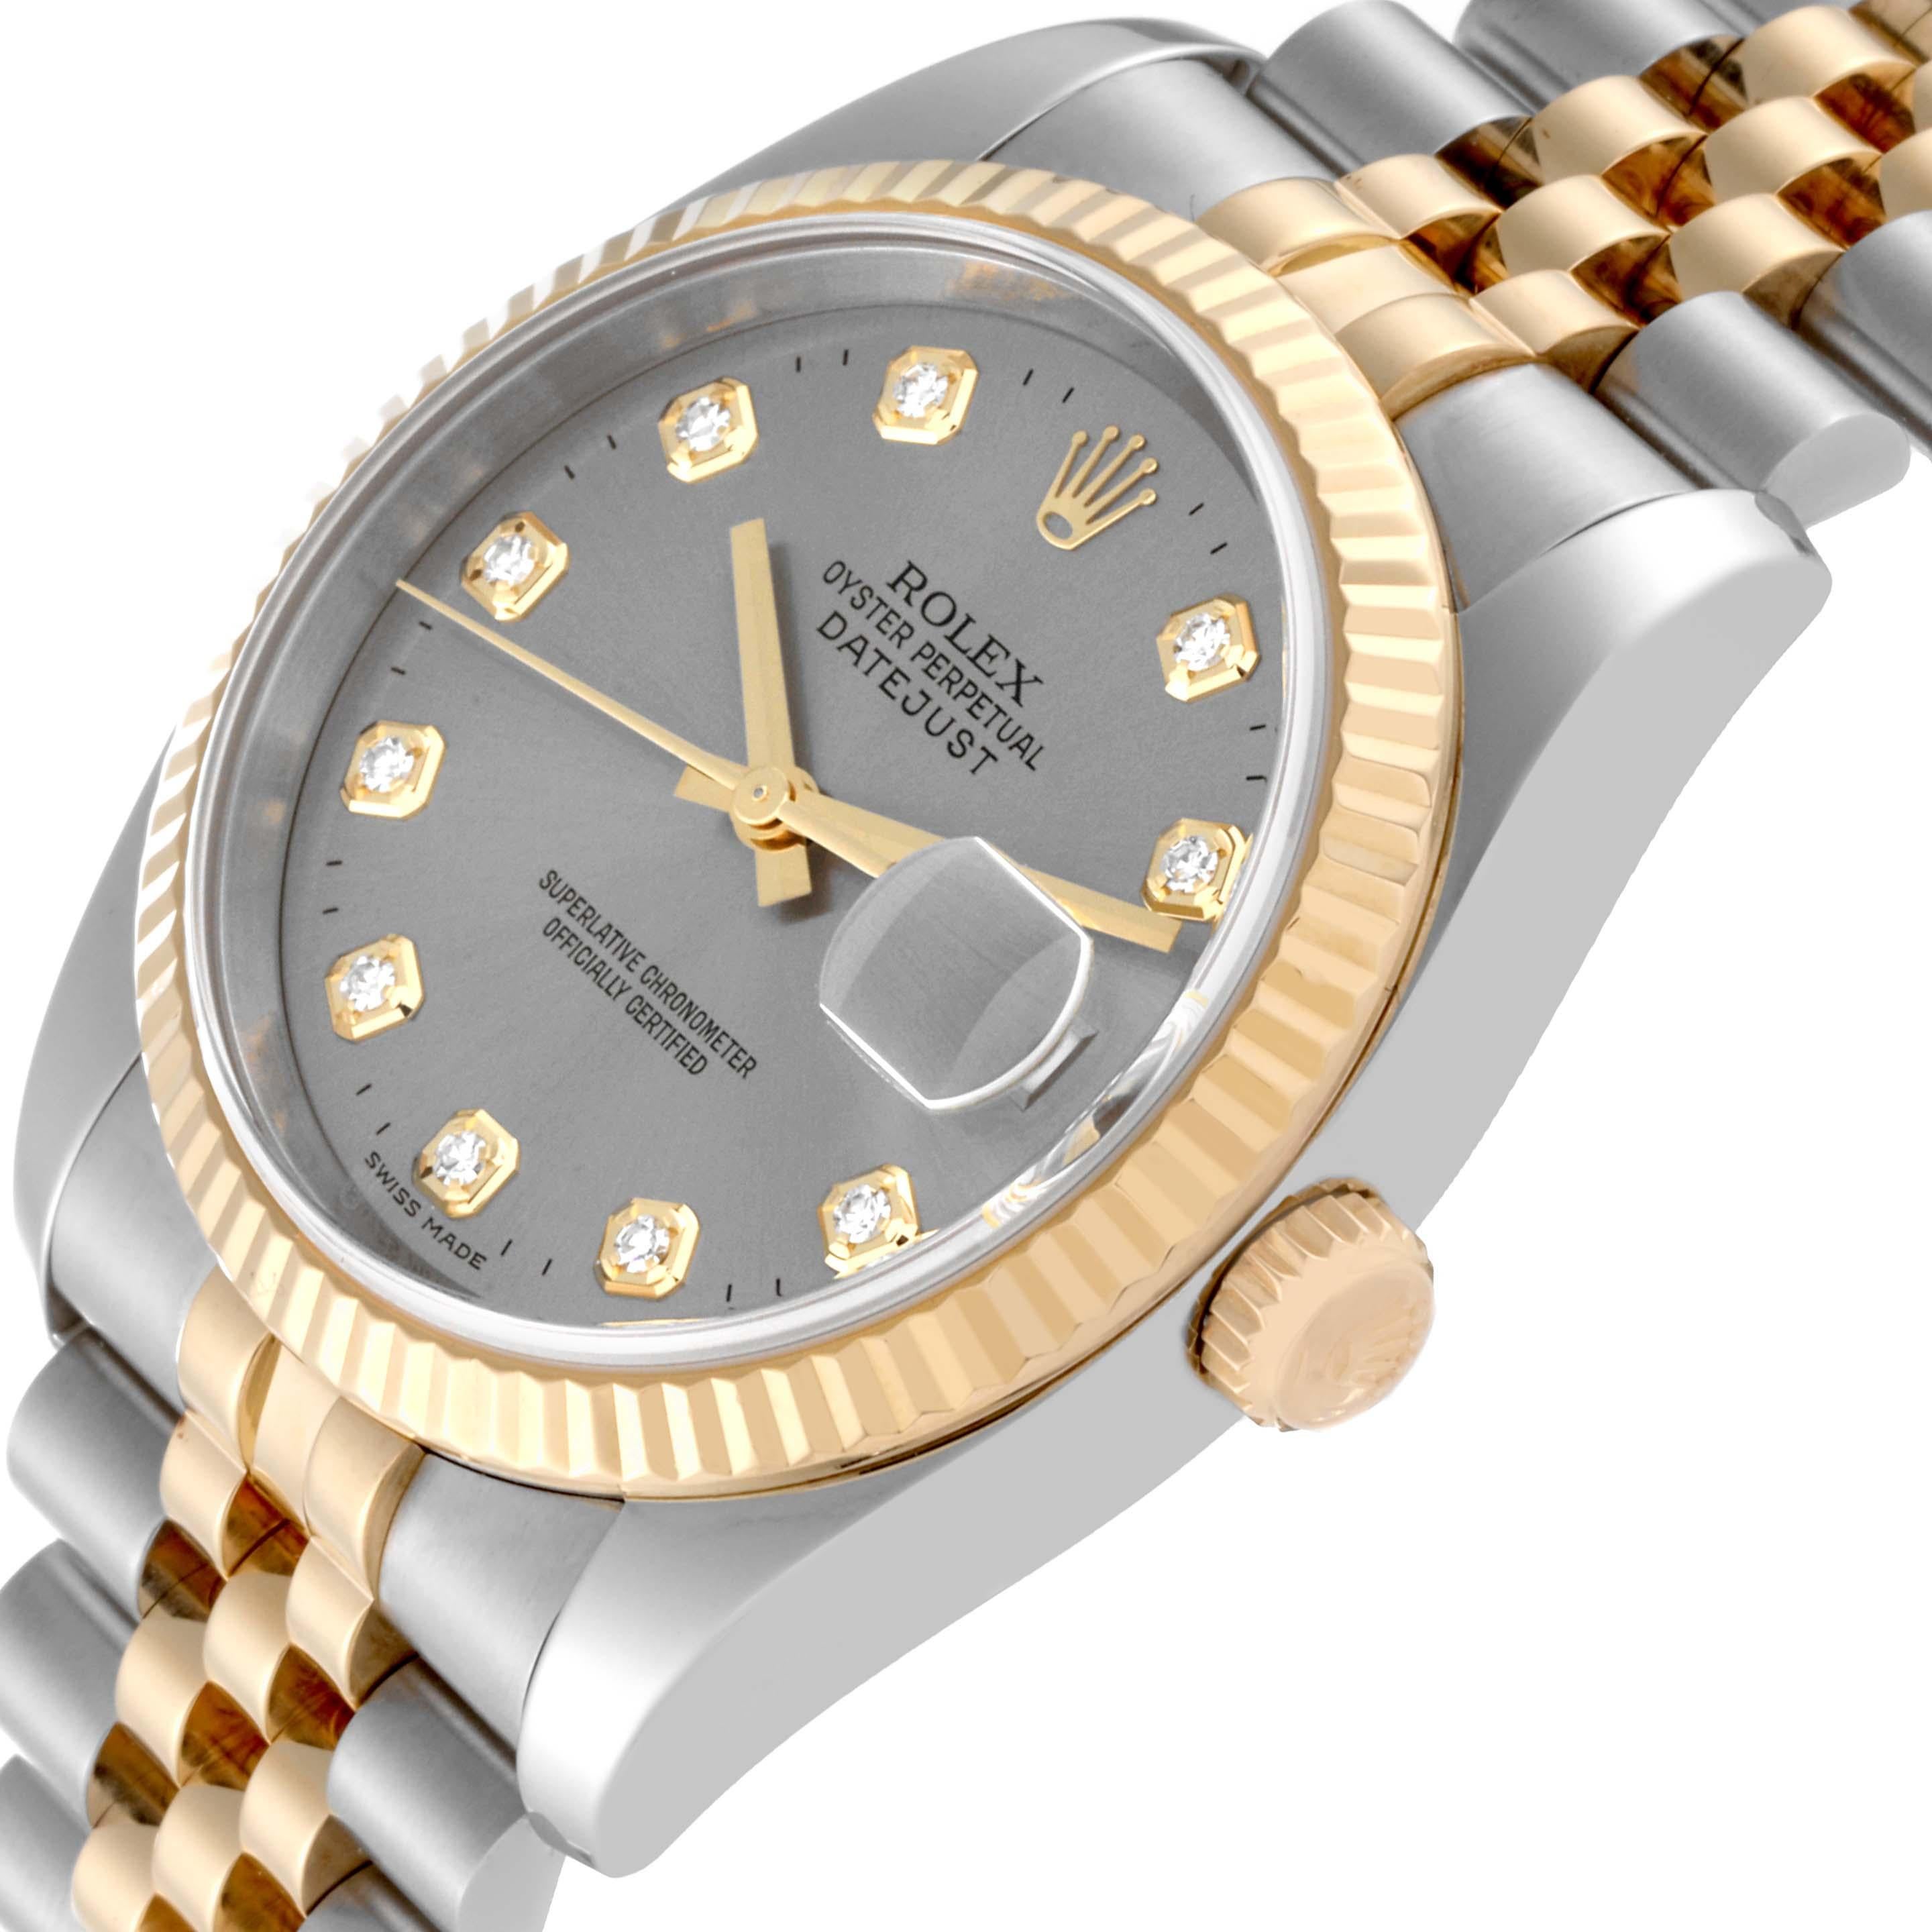 Rolex Datejust Steel Yellow Gold Diamond Dial Mens Watch 116233 Box Papers For Sale 2